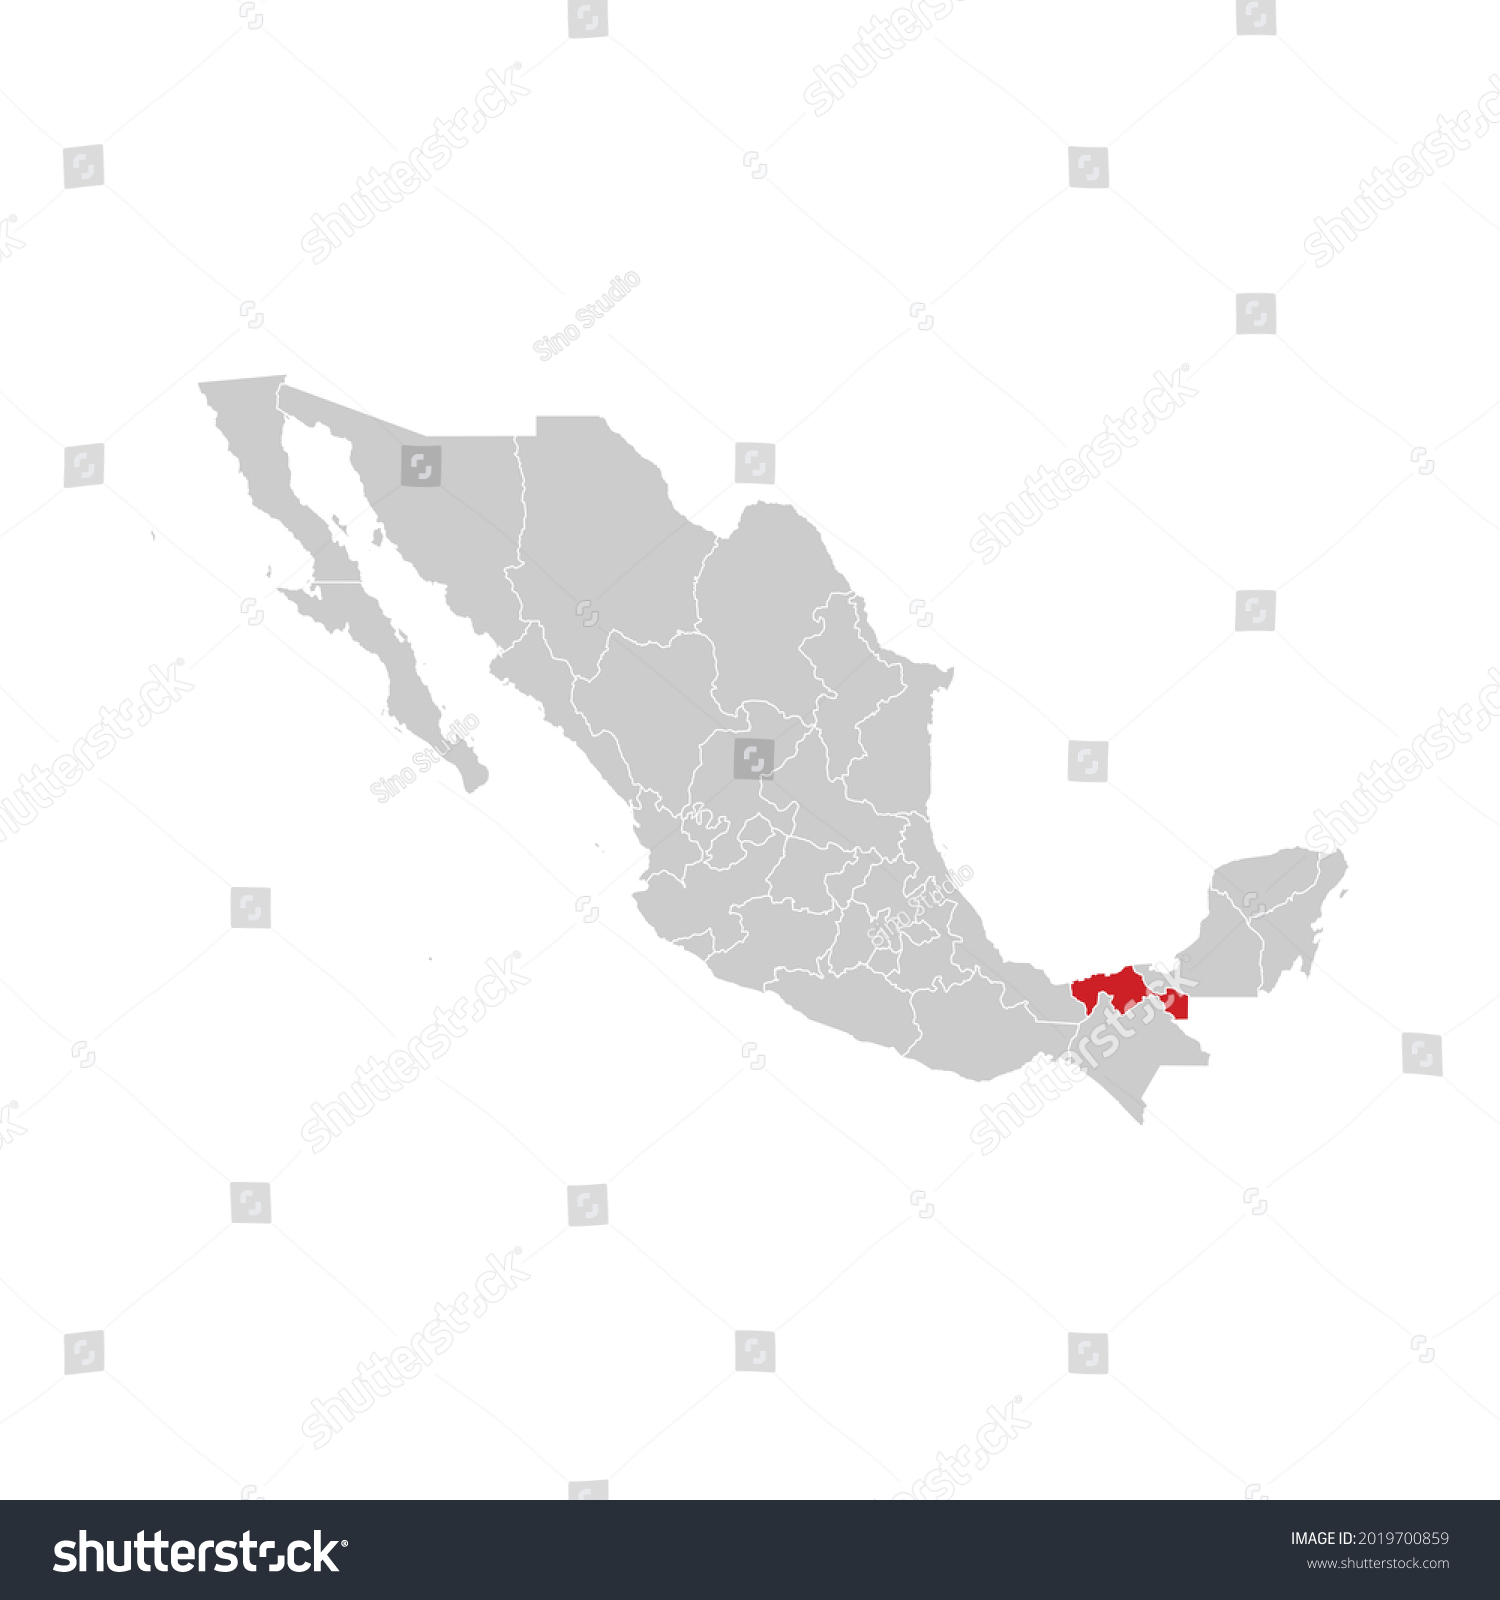 Location of Tabasco in Mexico Map Vector #2019700859